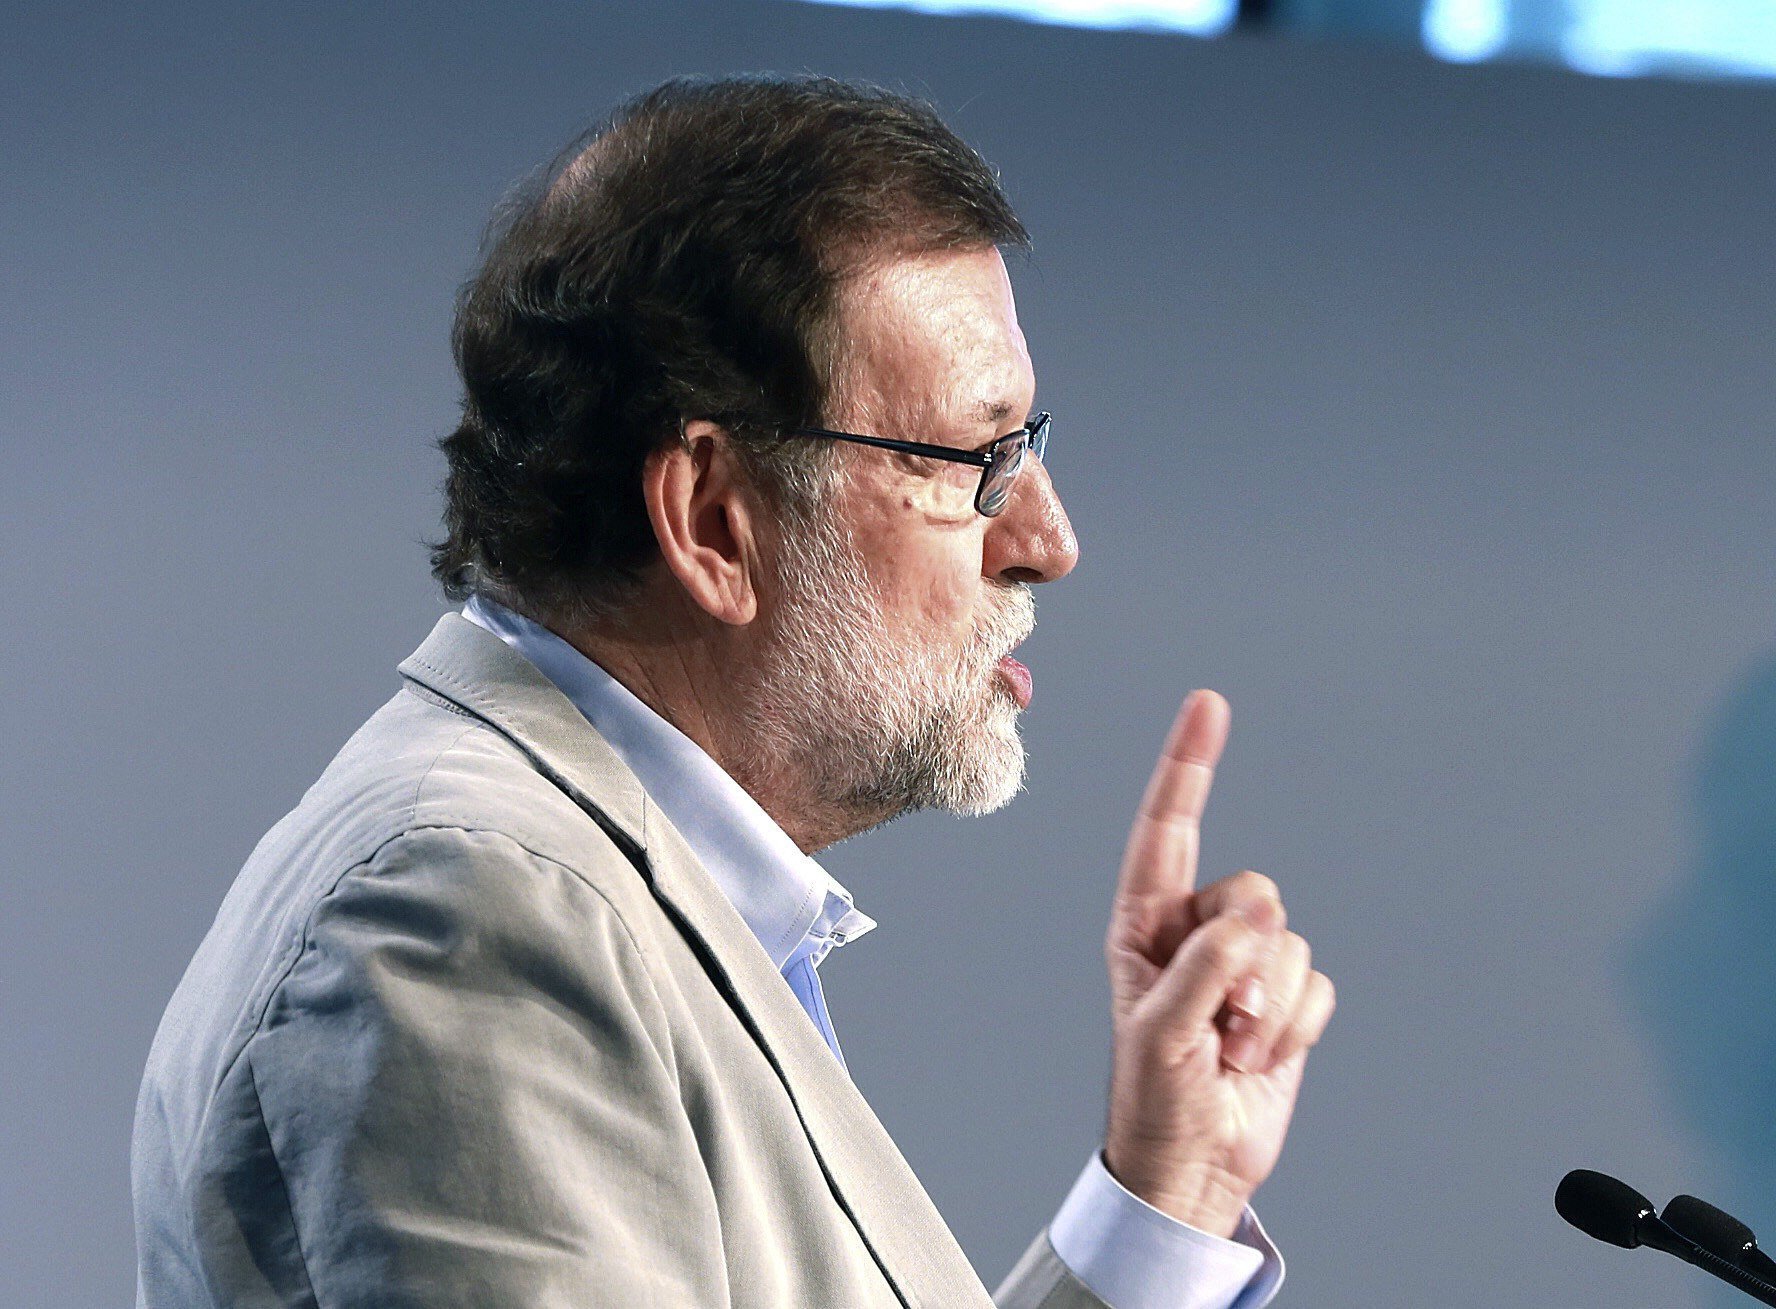 Spanish PM Rajoy threatens independence supporters, says they're underestimating the state